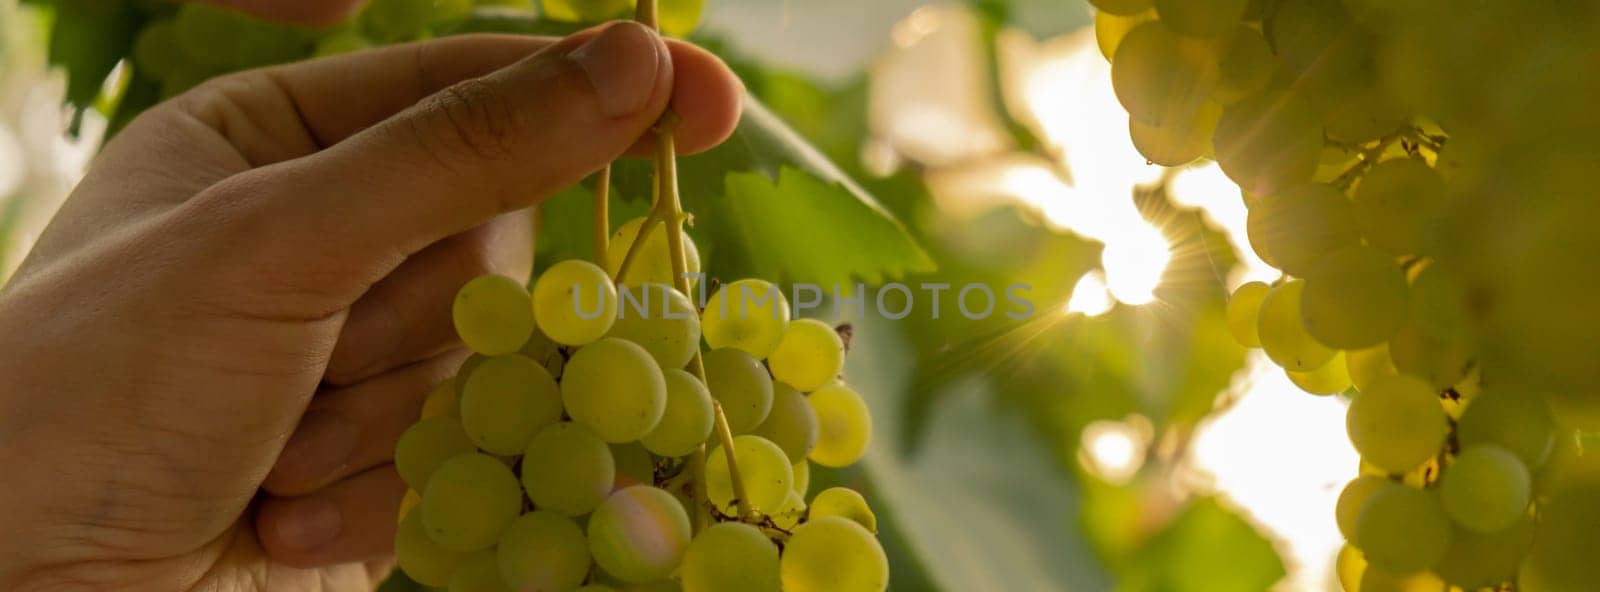 Male farmer picks bunches fresh grown green grapes from vineyard. Wine making produce. Homegrown locally agriculture healthy country life concept. Sunlight illuminates harvest. Farming